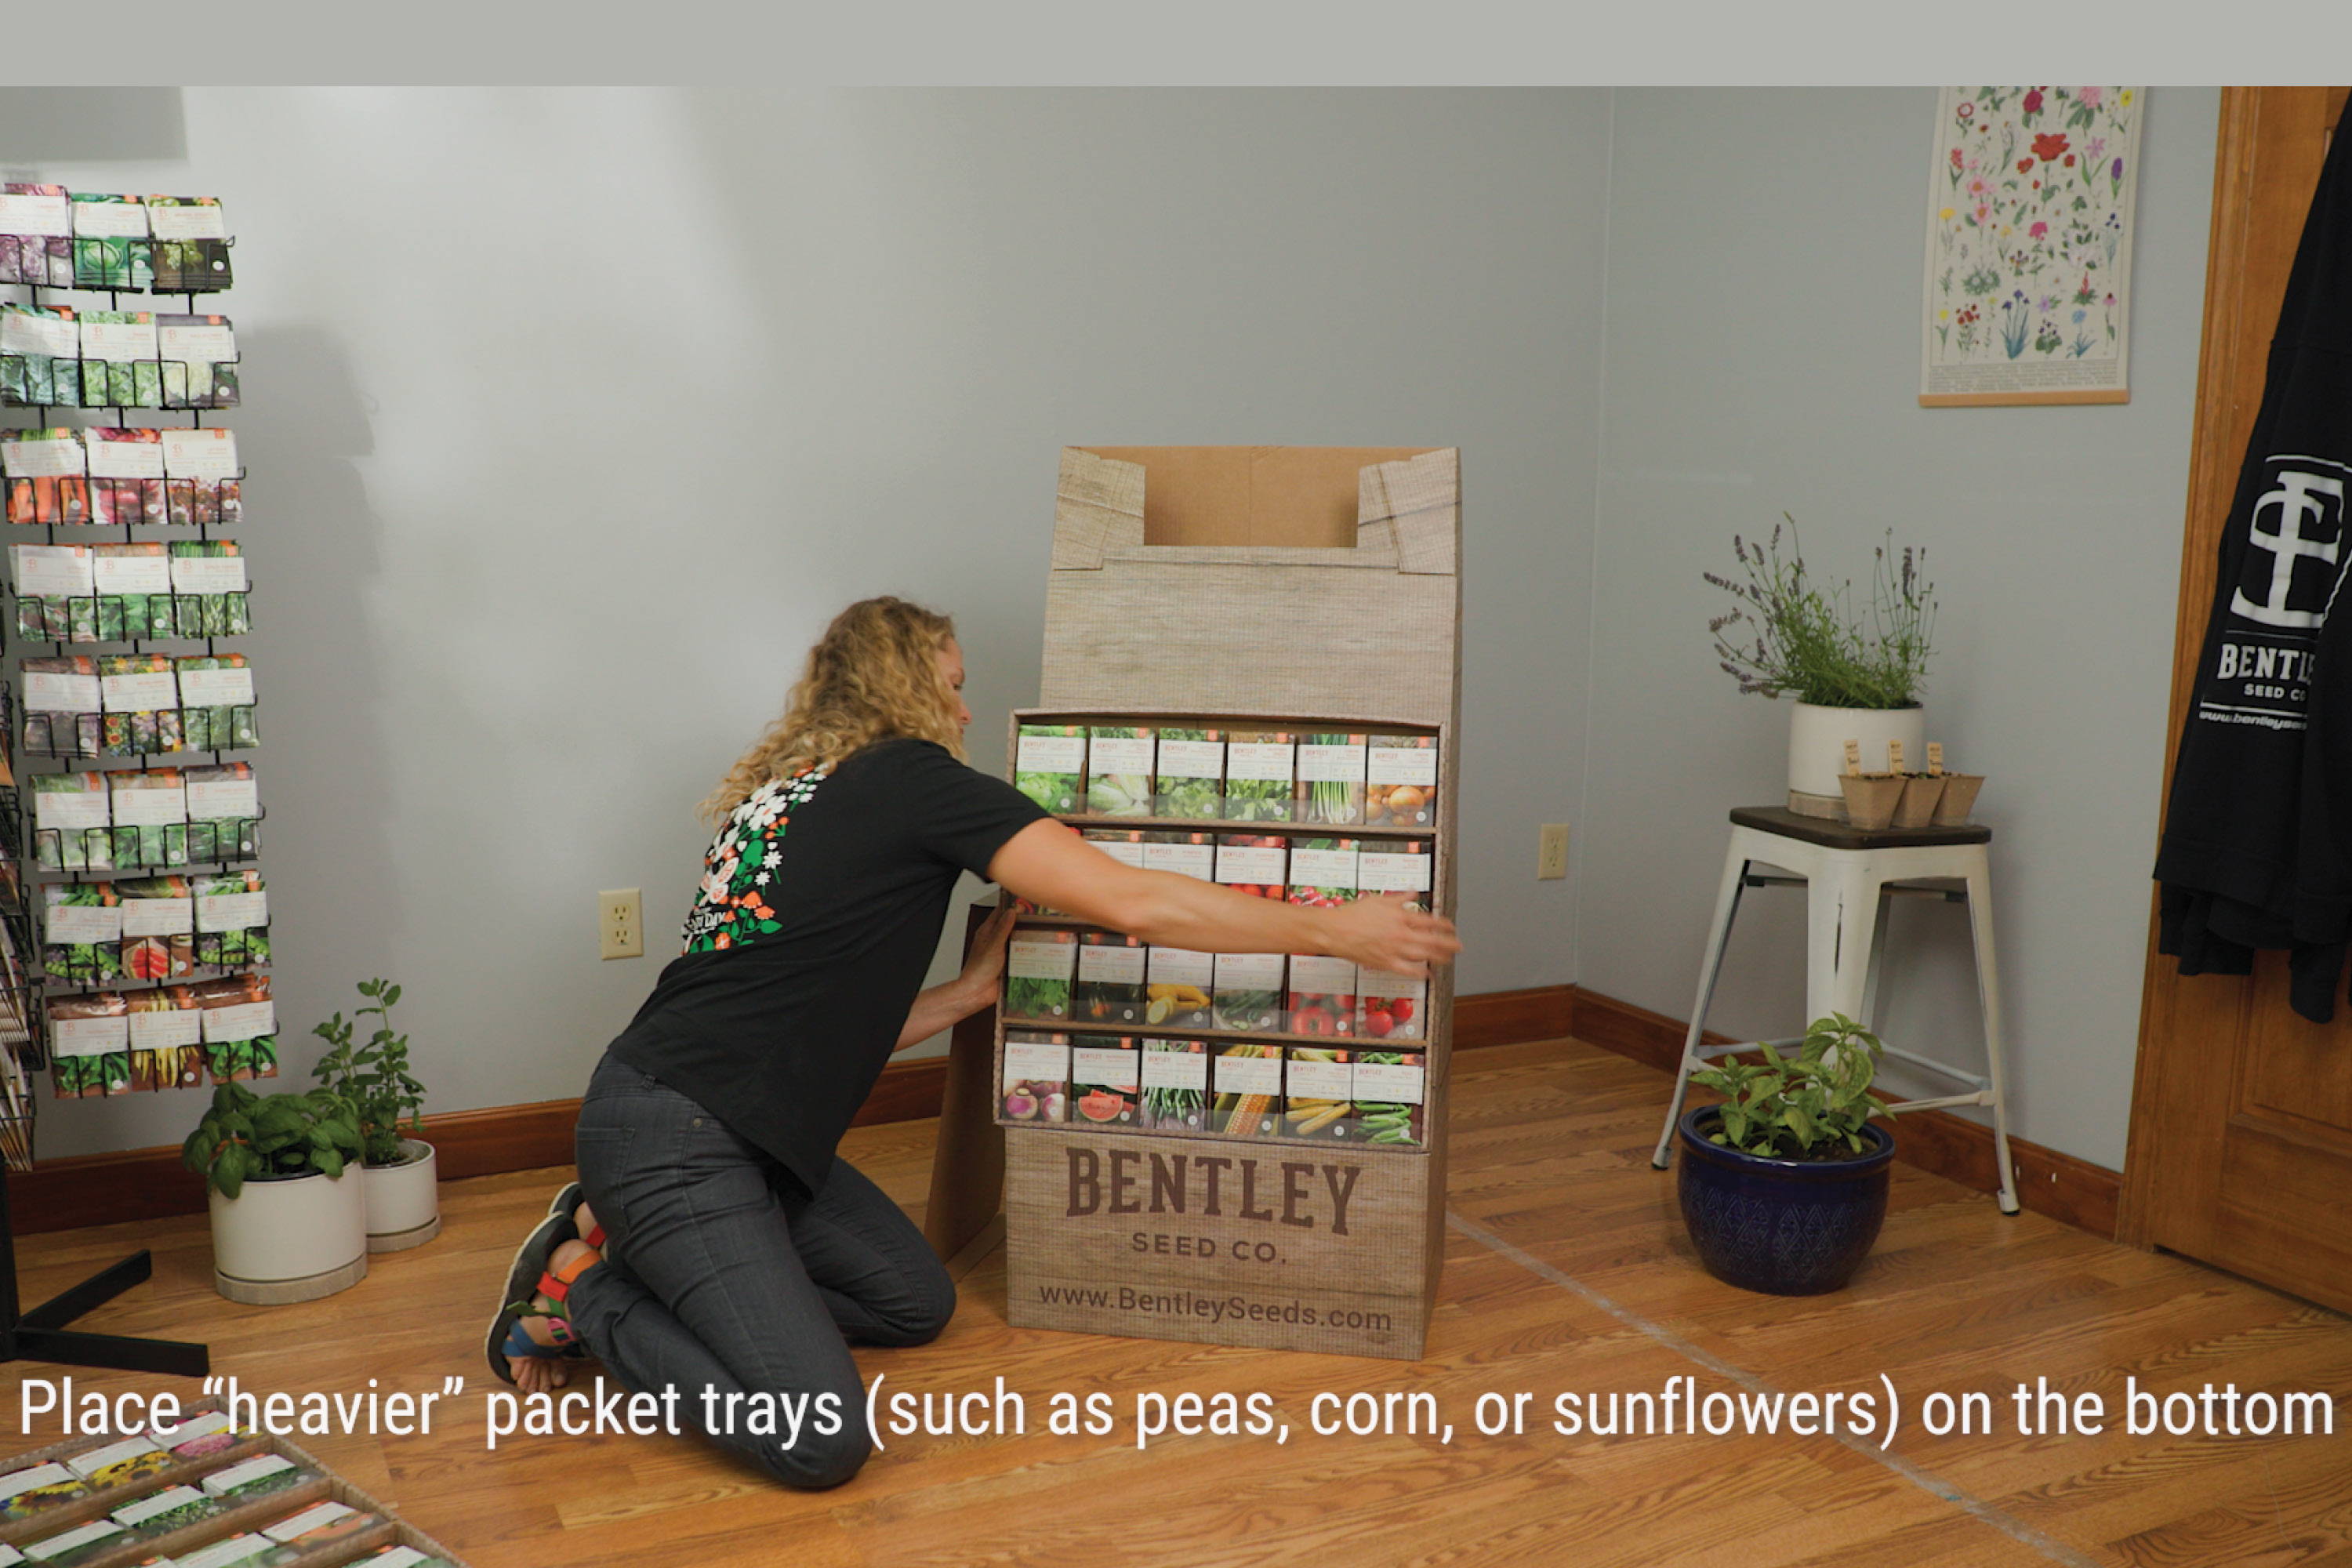 Bentley Seeds Display Instructions -place "heavier" packet trays (such as peas, corn, or sunfloers) on the bottom